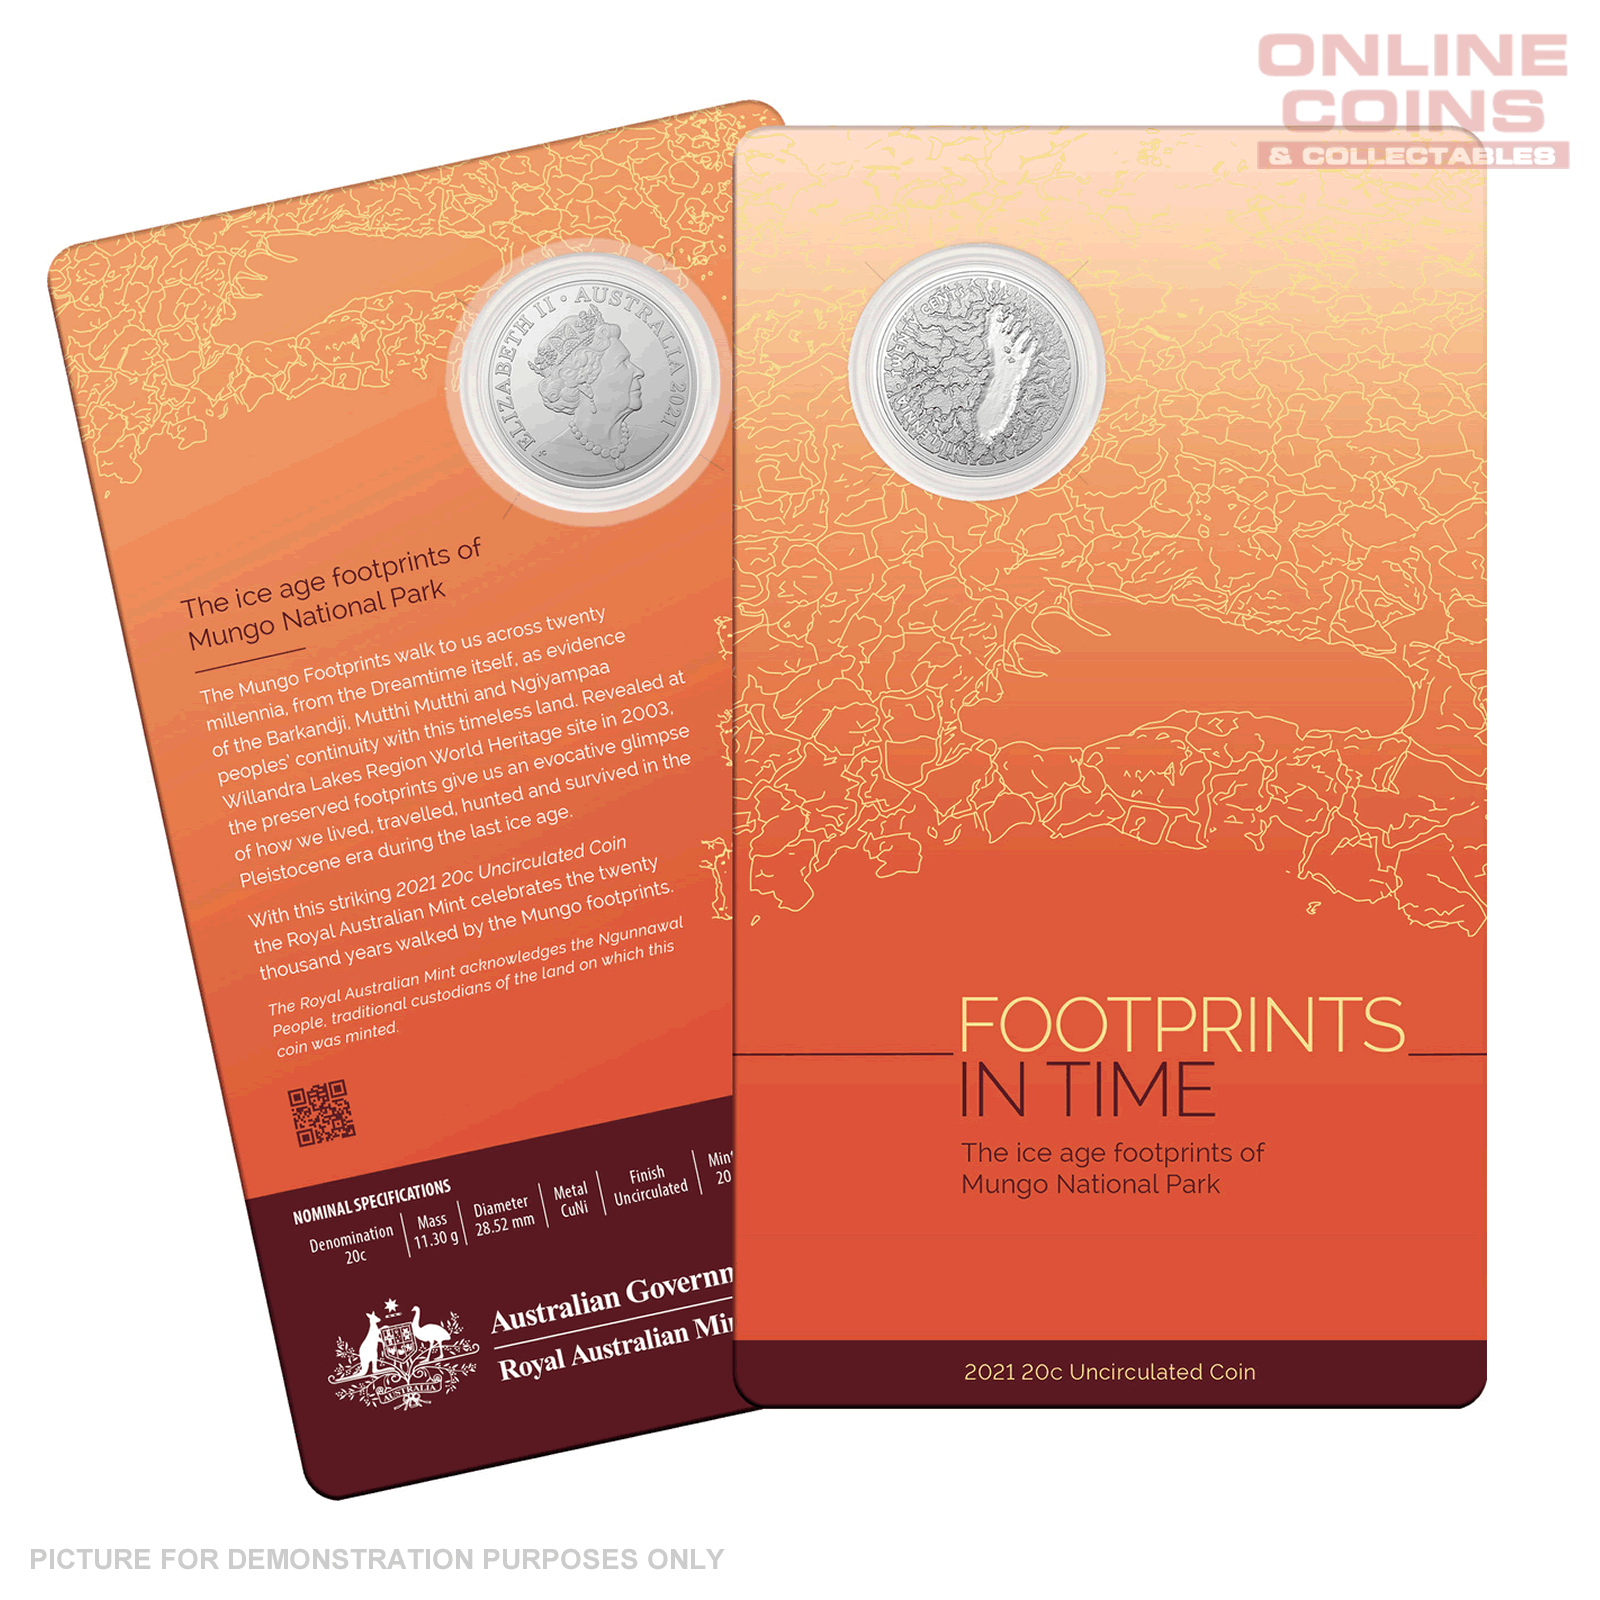 2021 Royal Australian Mint 20 Uncirculated Coin In Card - Footprints In Time (Damaged Cards)